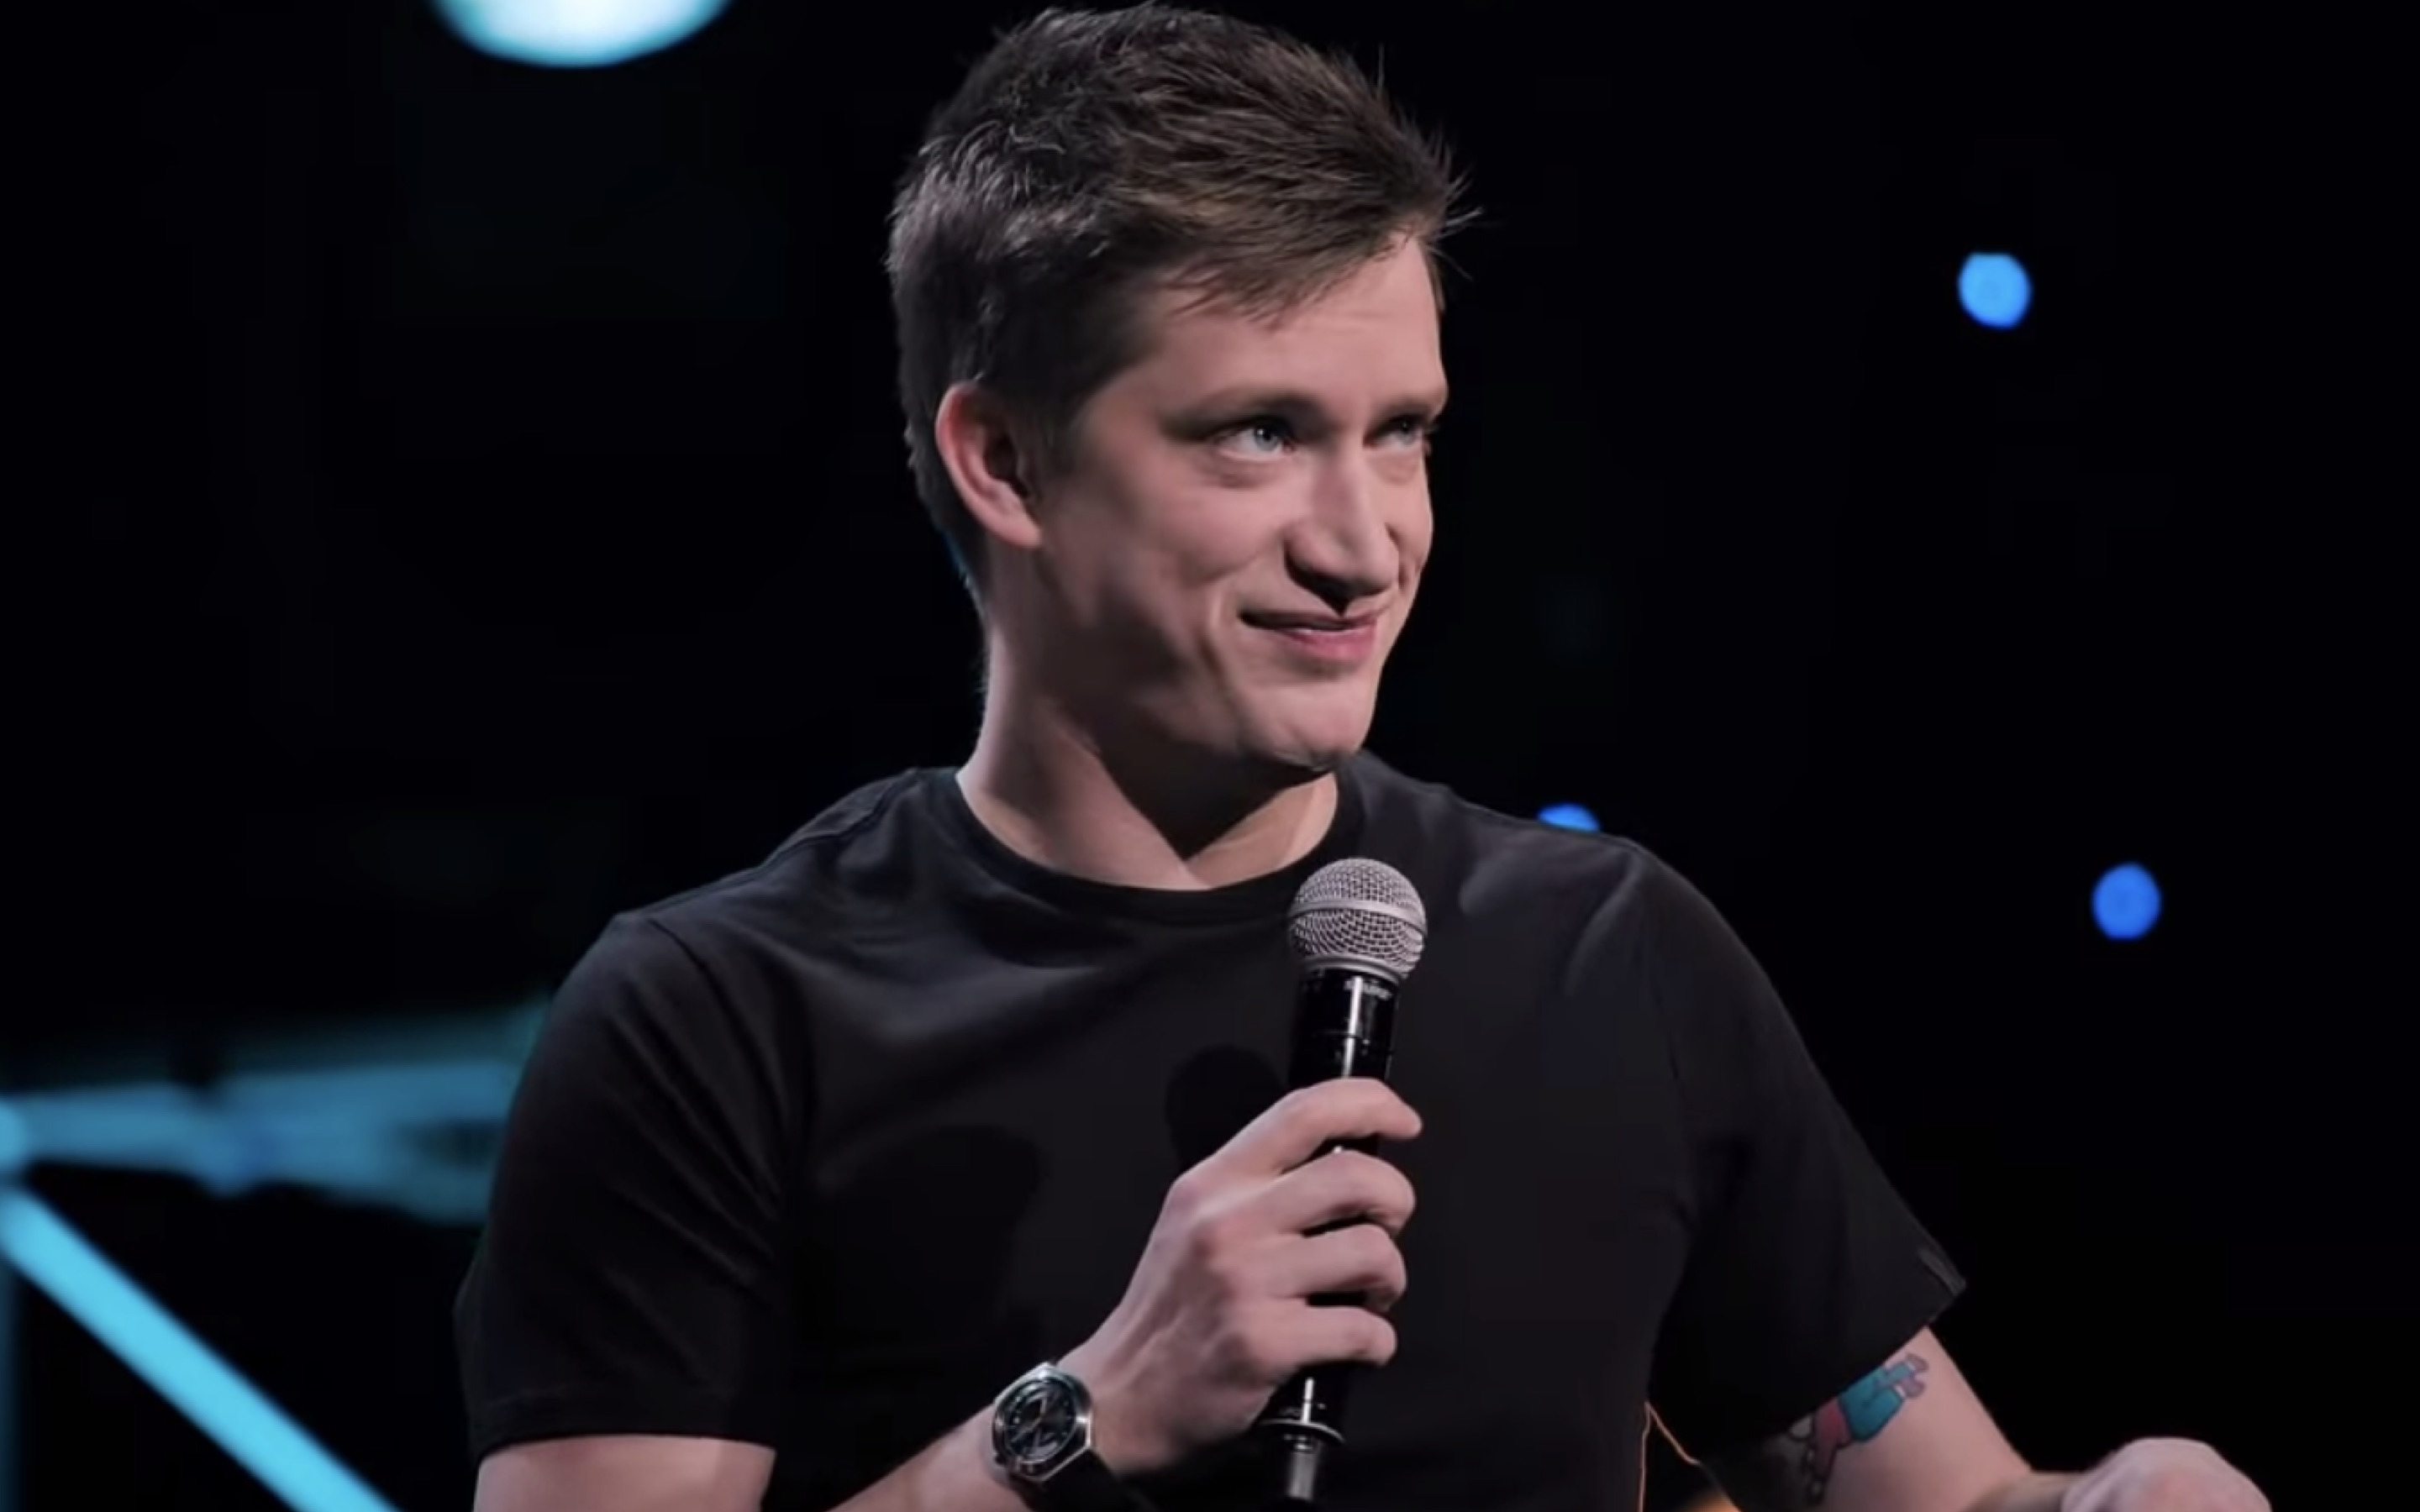 Scottish comedian Daniel Sloss will be taking to the stage with his stand-up show this weekend. Screengrab via YouTube.